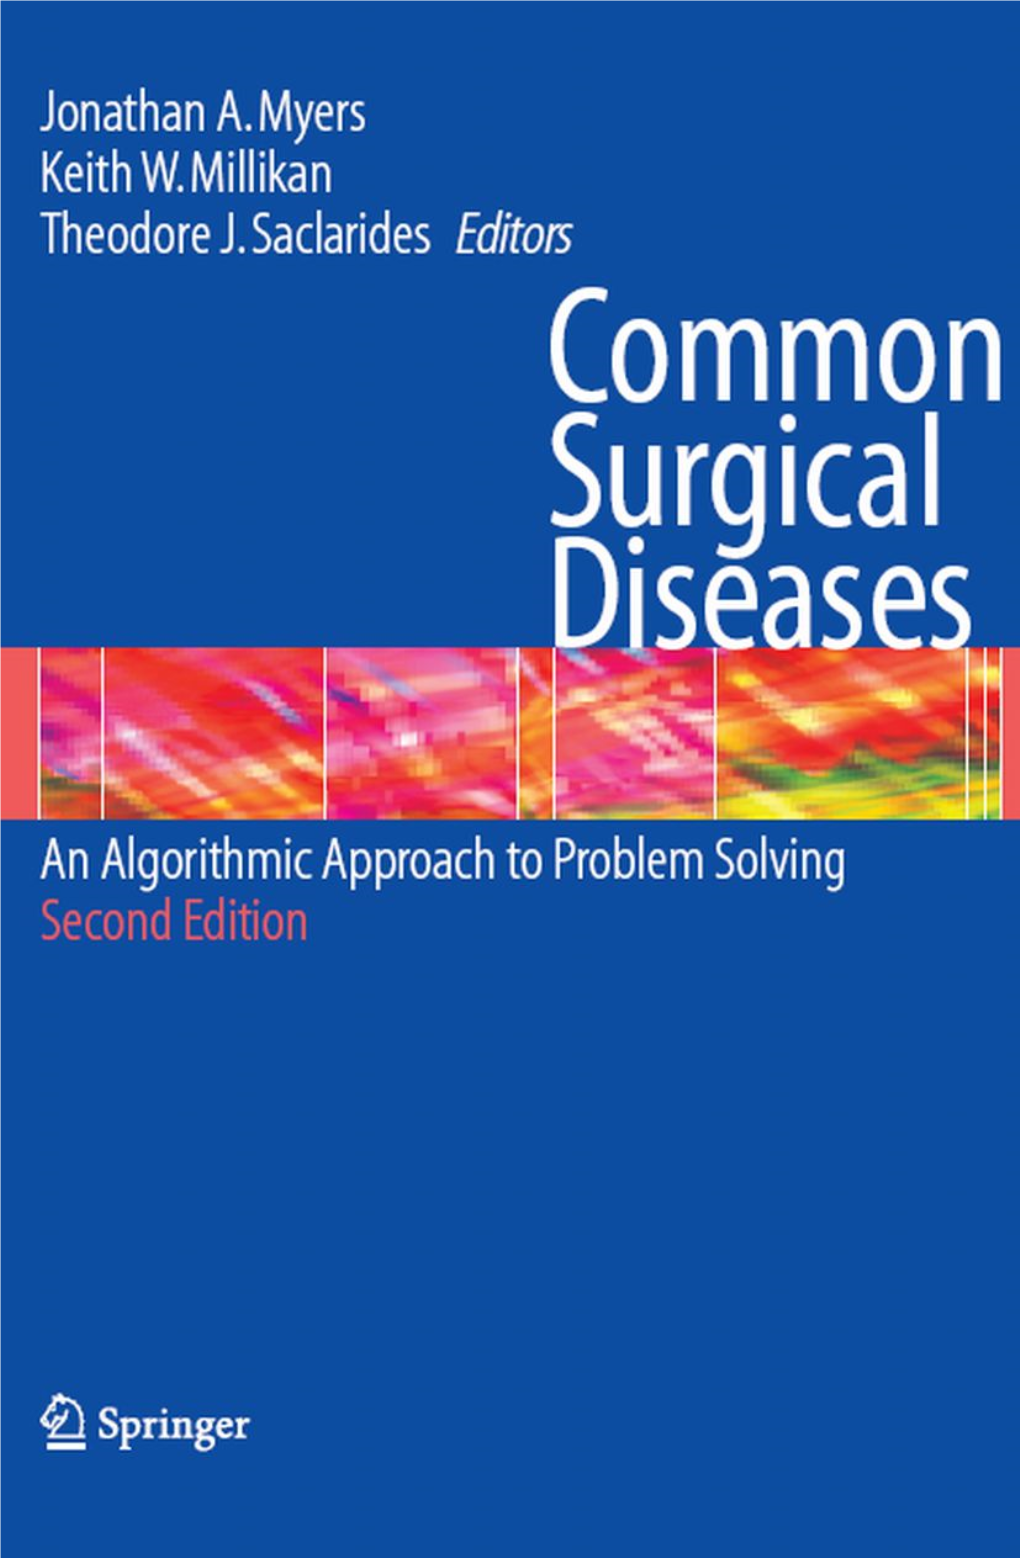 Common Surgical Diseases.Pdf